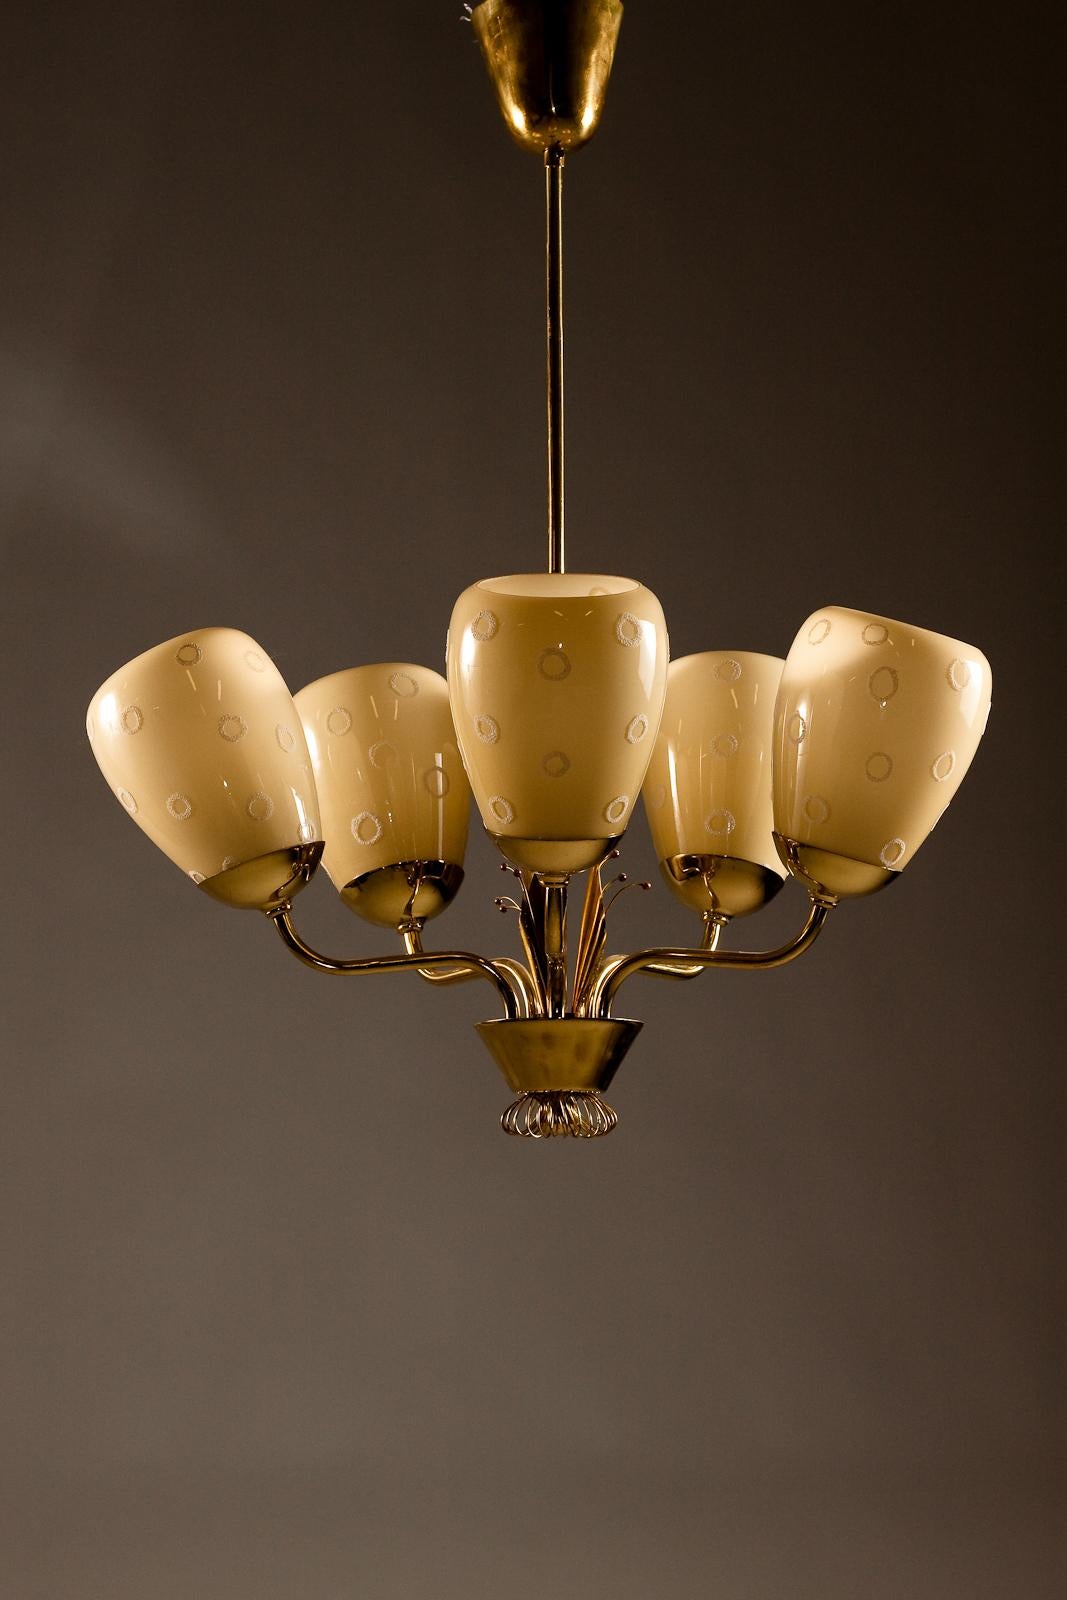 Introducing the stunning Mauri Almari 1950's brass chandelier from Idman Oy. This vintage beauty features intricate decorative ornaments in brass, adding a touch of elegance to any room. The hand-painted glass shades exude a warm, inviting glow,